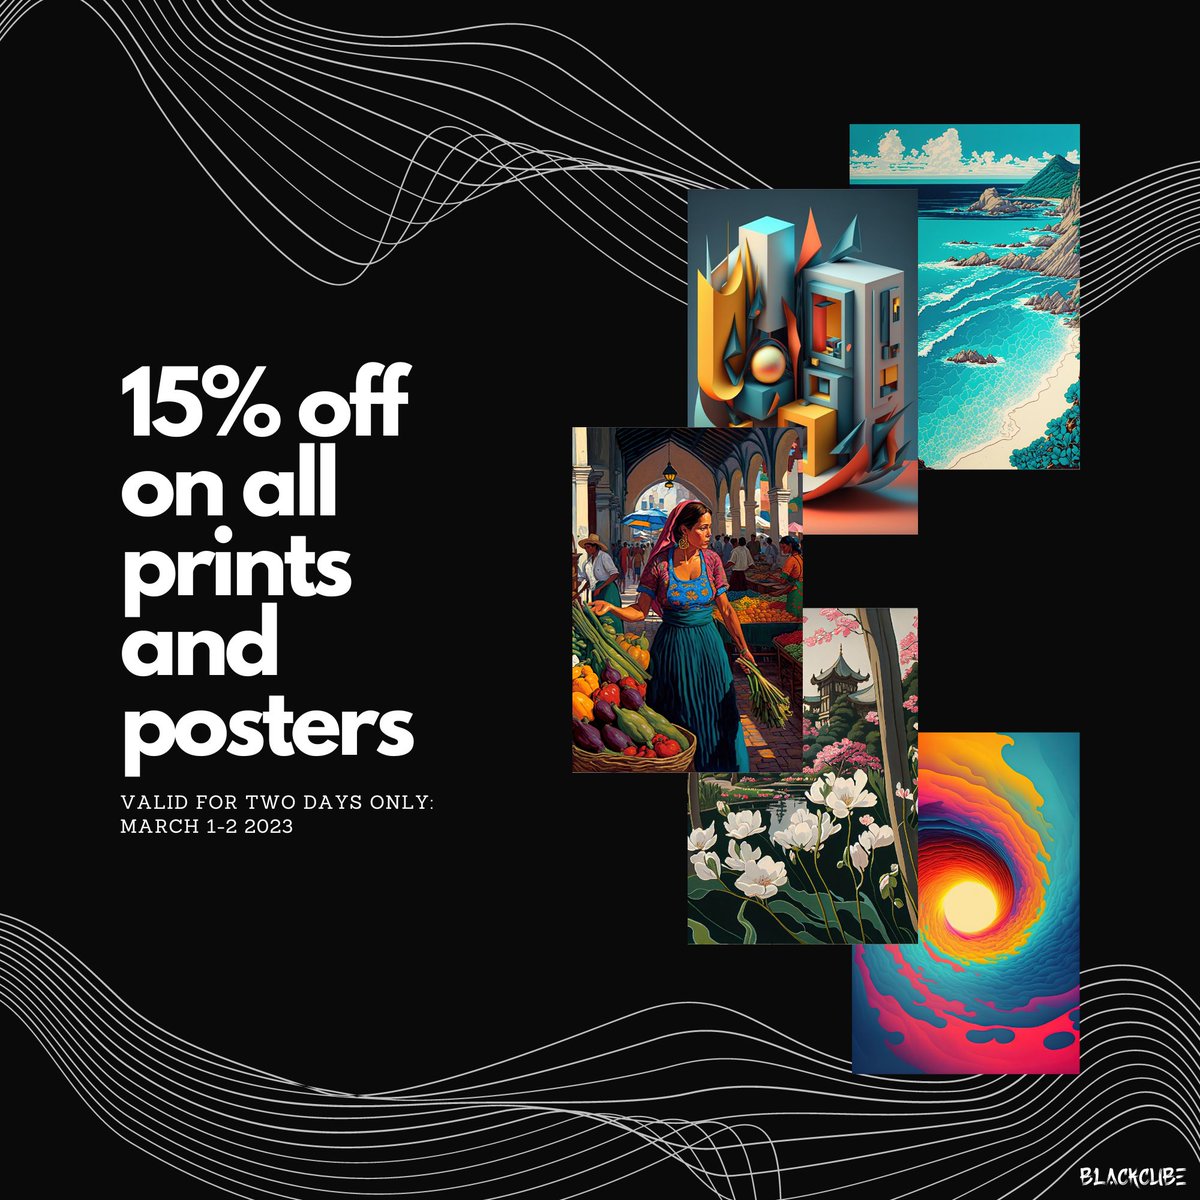 BlackCube's flash sale is happening now! Get 15% off on all prints and posters until March 2nd. Don't wait to decorate your walls with our stunning art. rli.to/HwdvN #BlackCube #FlashSale #WallArt #AbstractArt #TravelPosters #Minimalism #ArtEnthusiasts #ArtAndTech